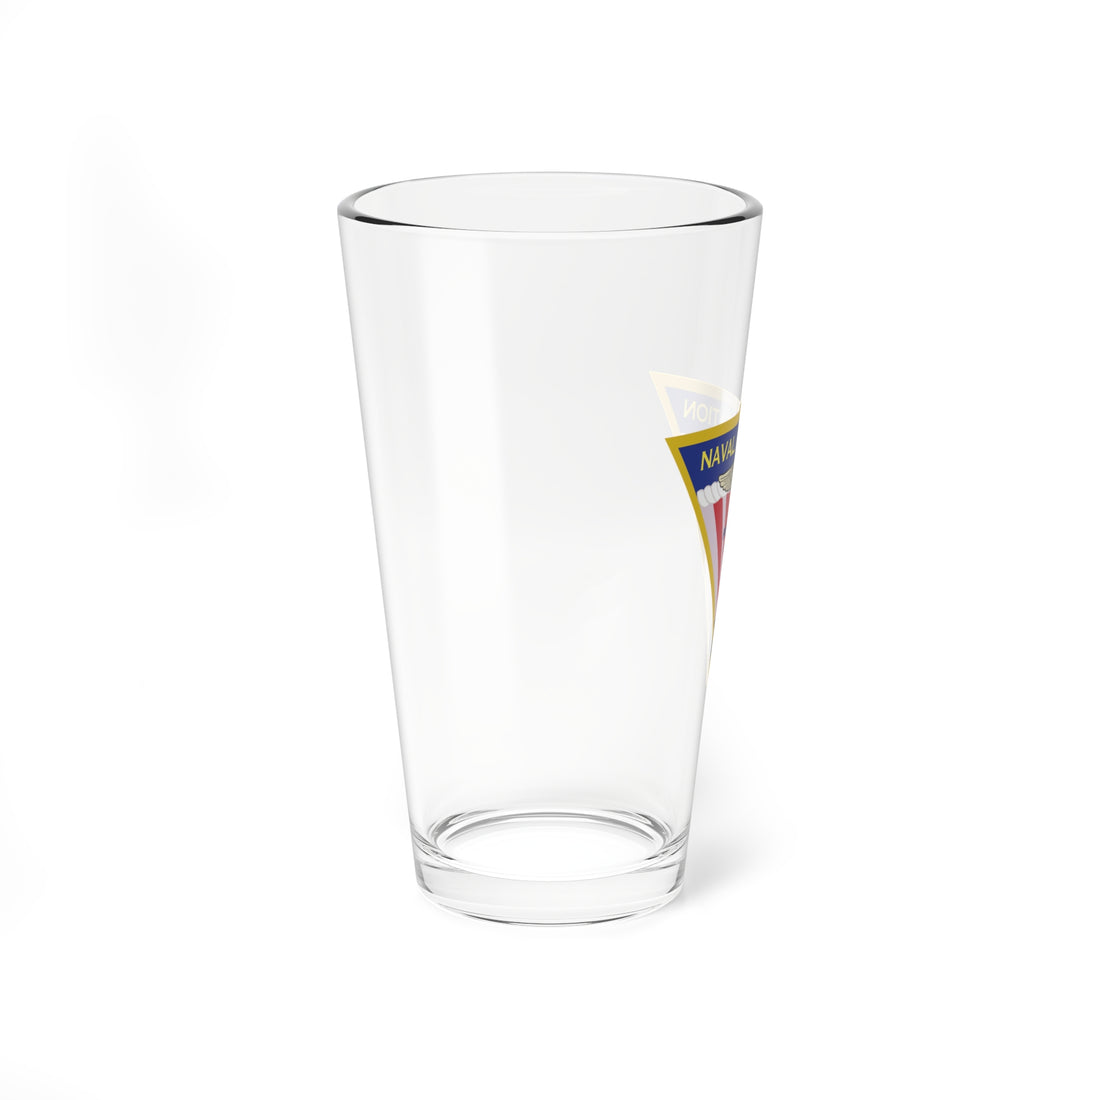 Naval Air Station Patuxent River (PAX) Pint Glass, US Navy Air Station in Southern Maryland